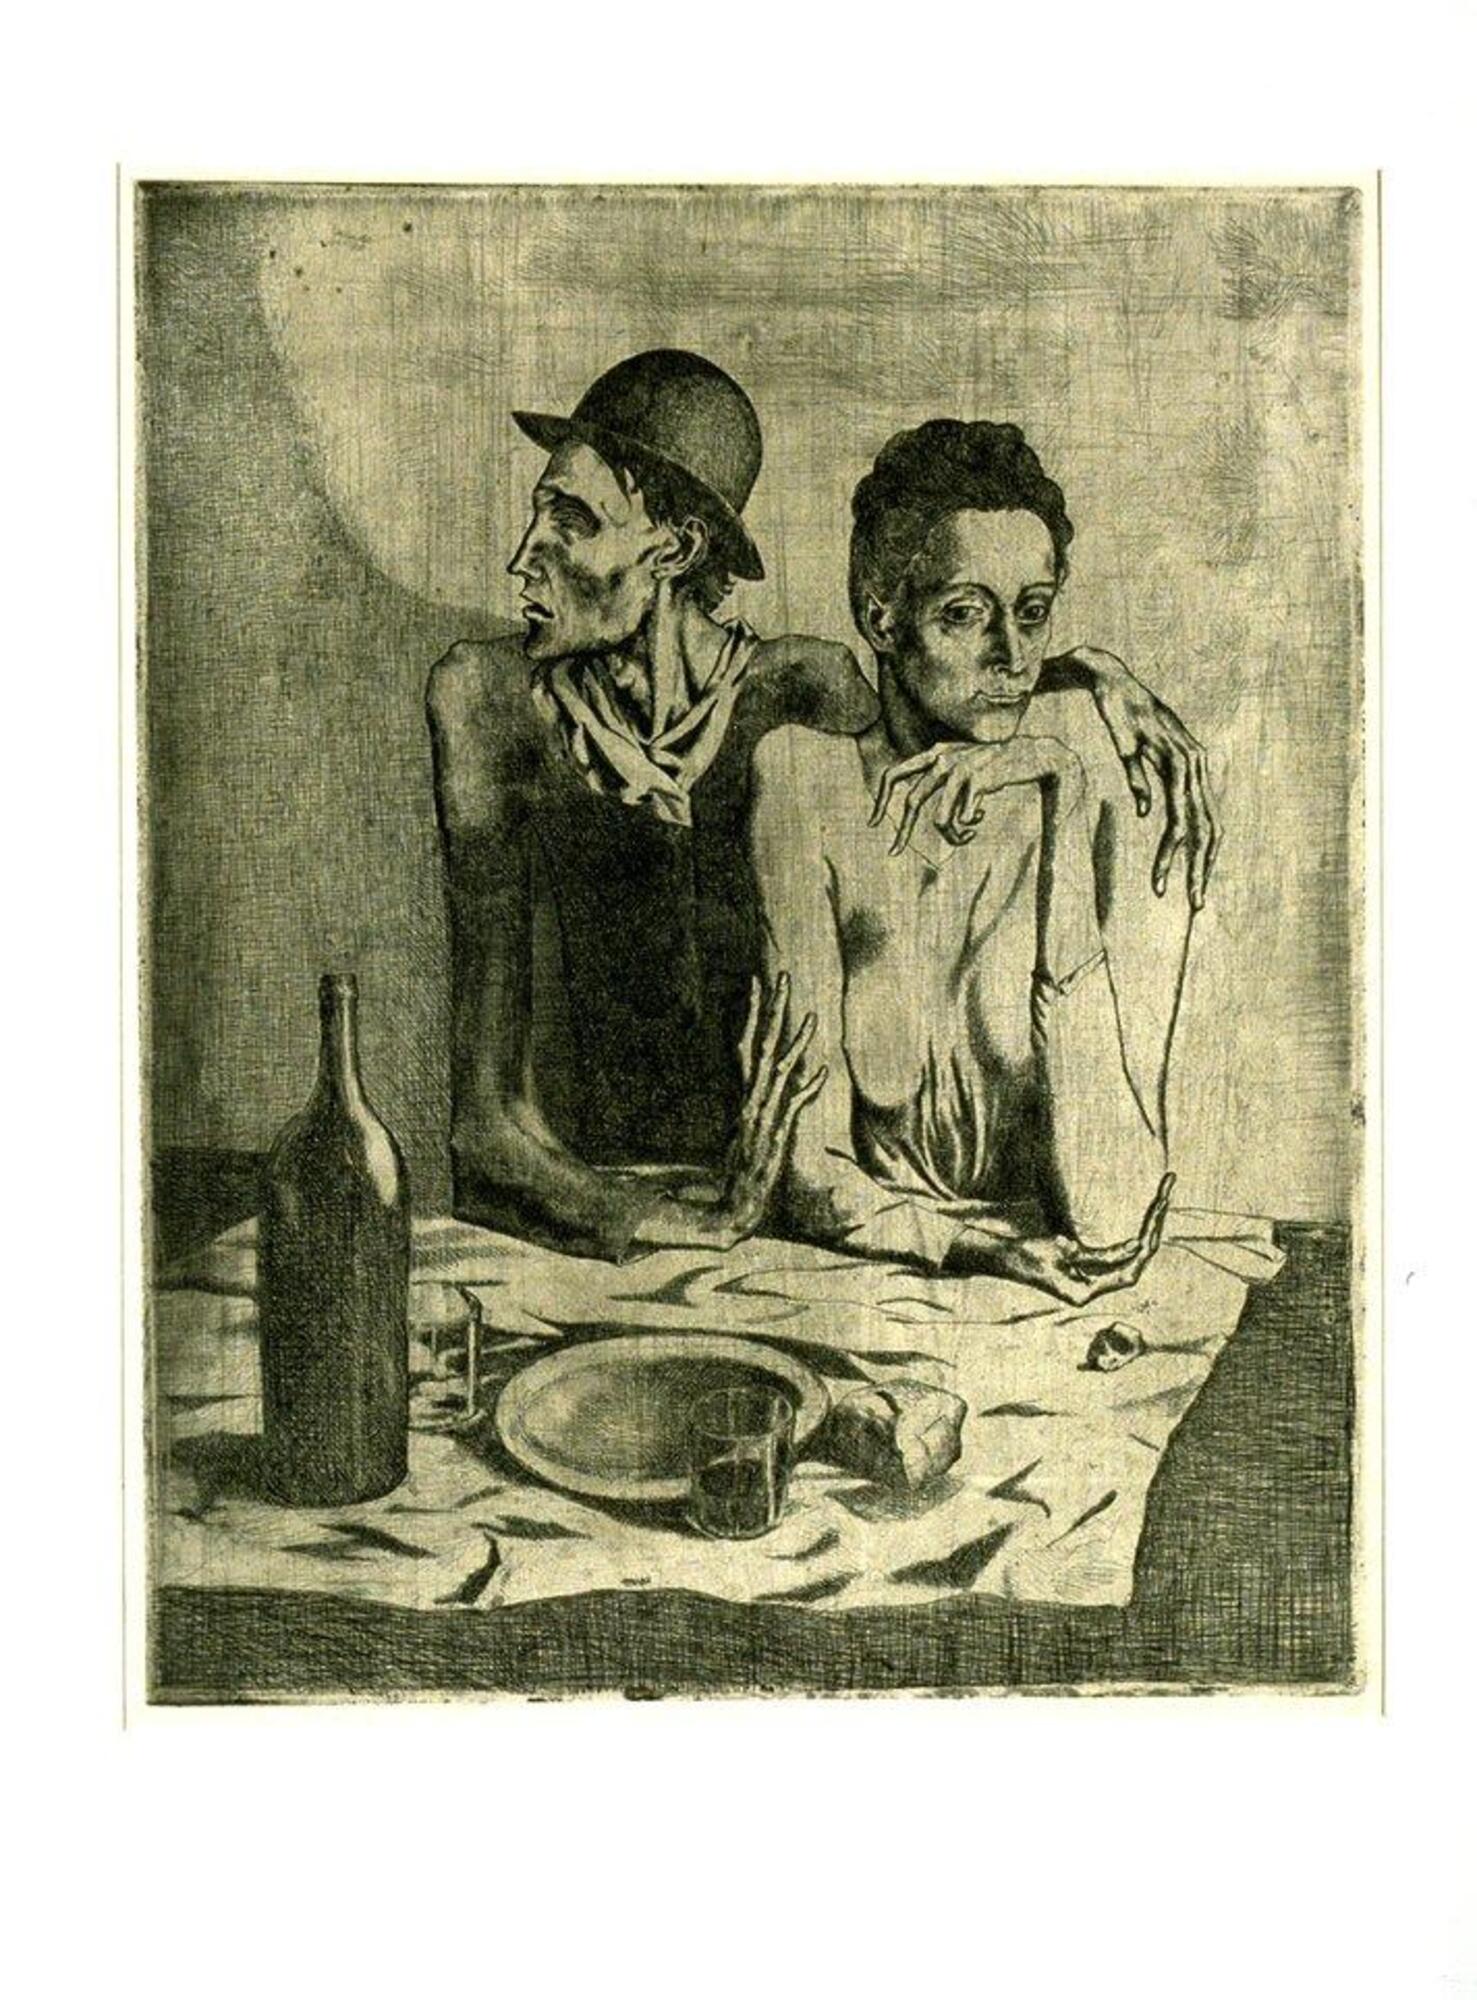 At the center of the scene, a man and a women sit at a table with an empty plate, two glasses, and a large bottle on the table before them. Their gazes are in nearly opposite directions and they appear gaunt.